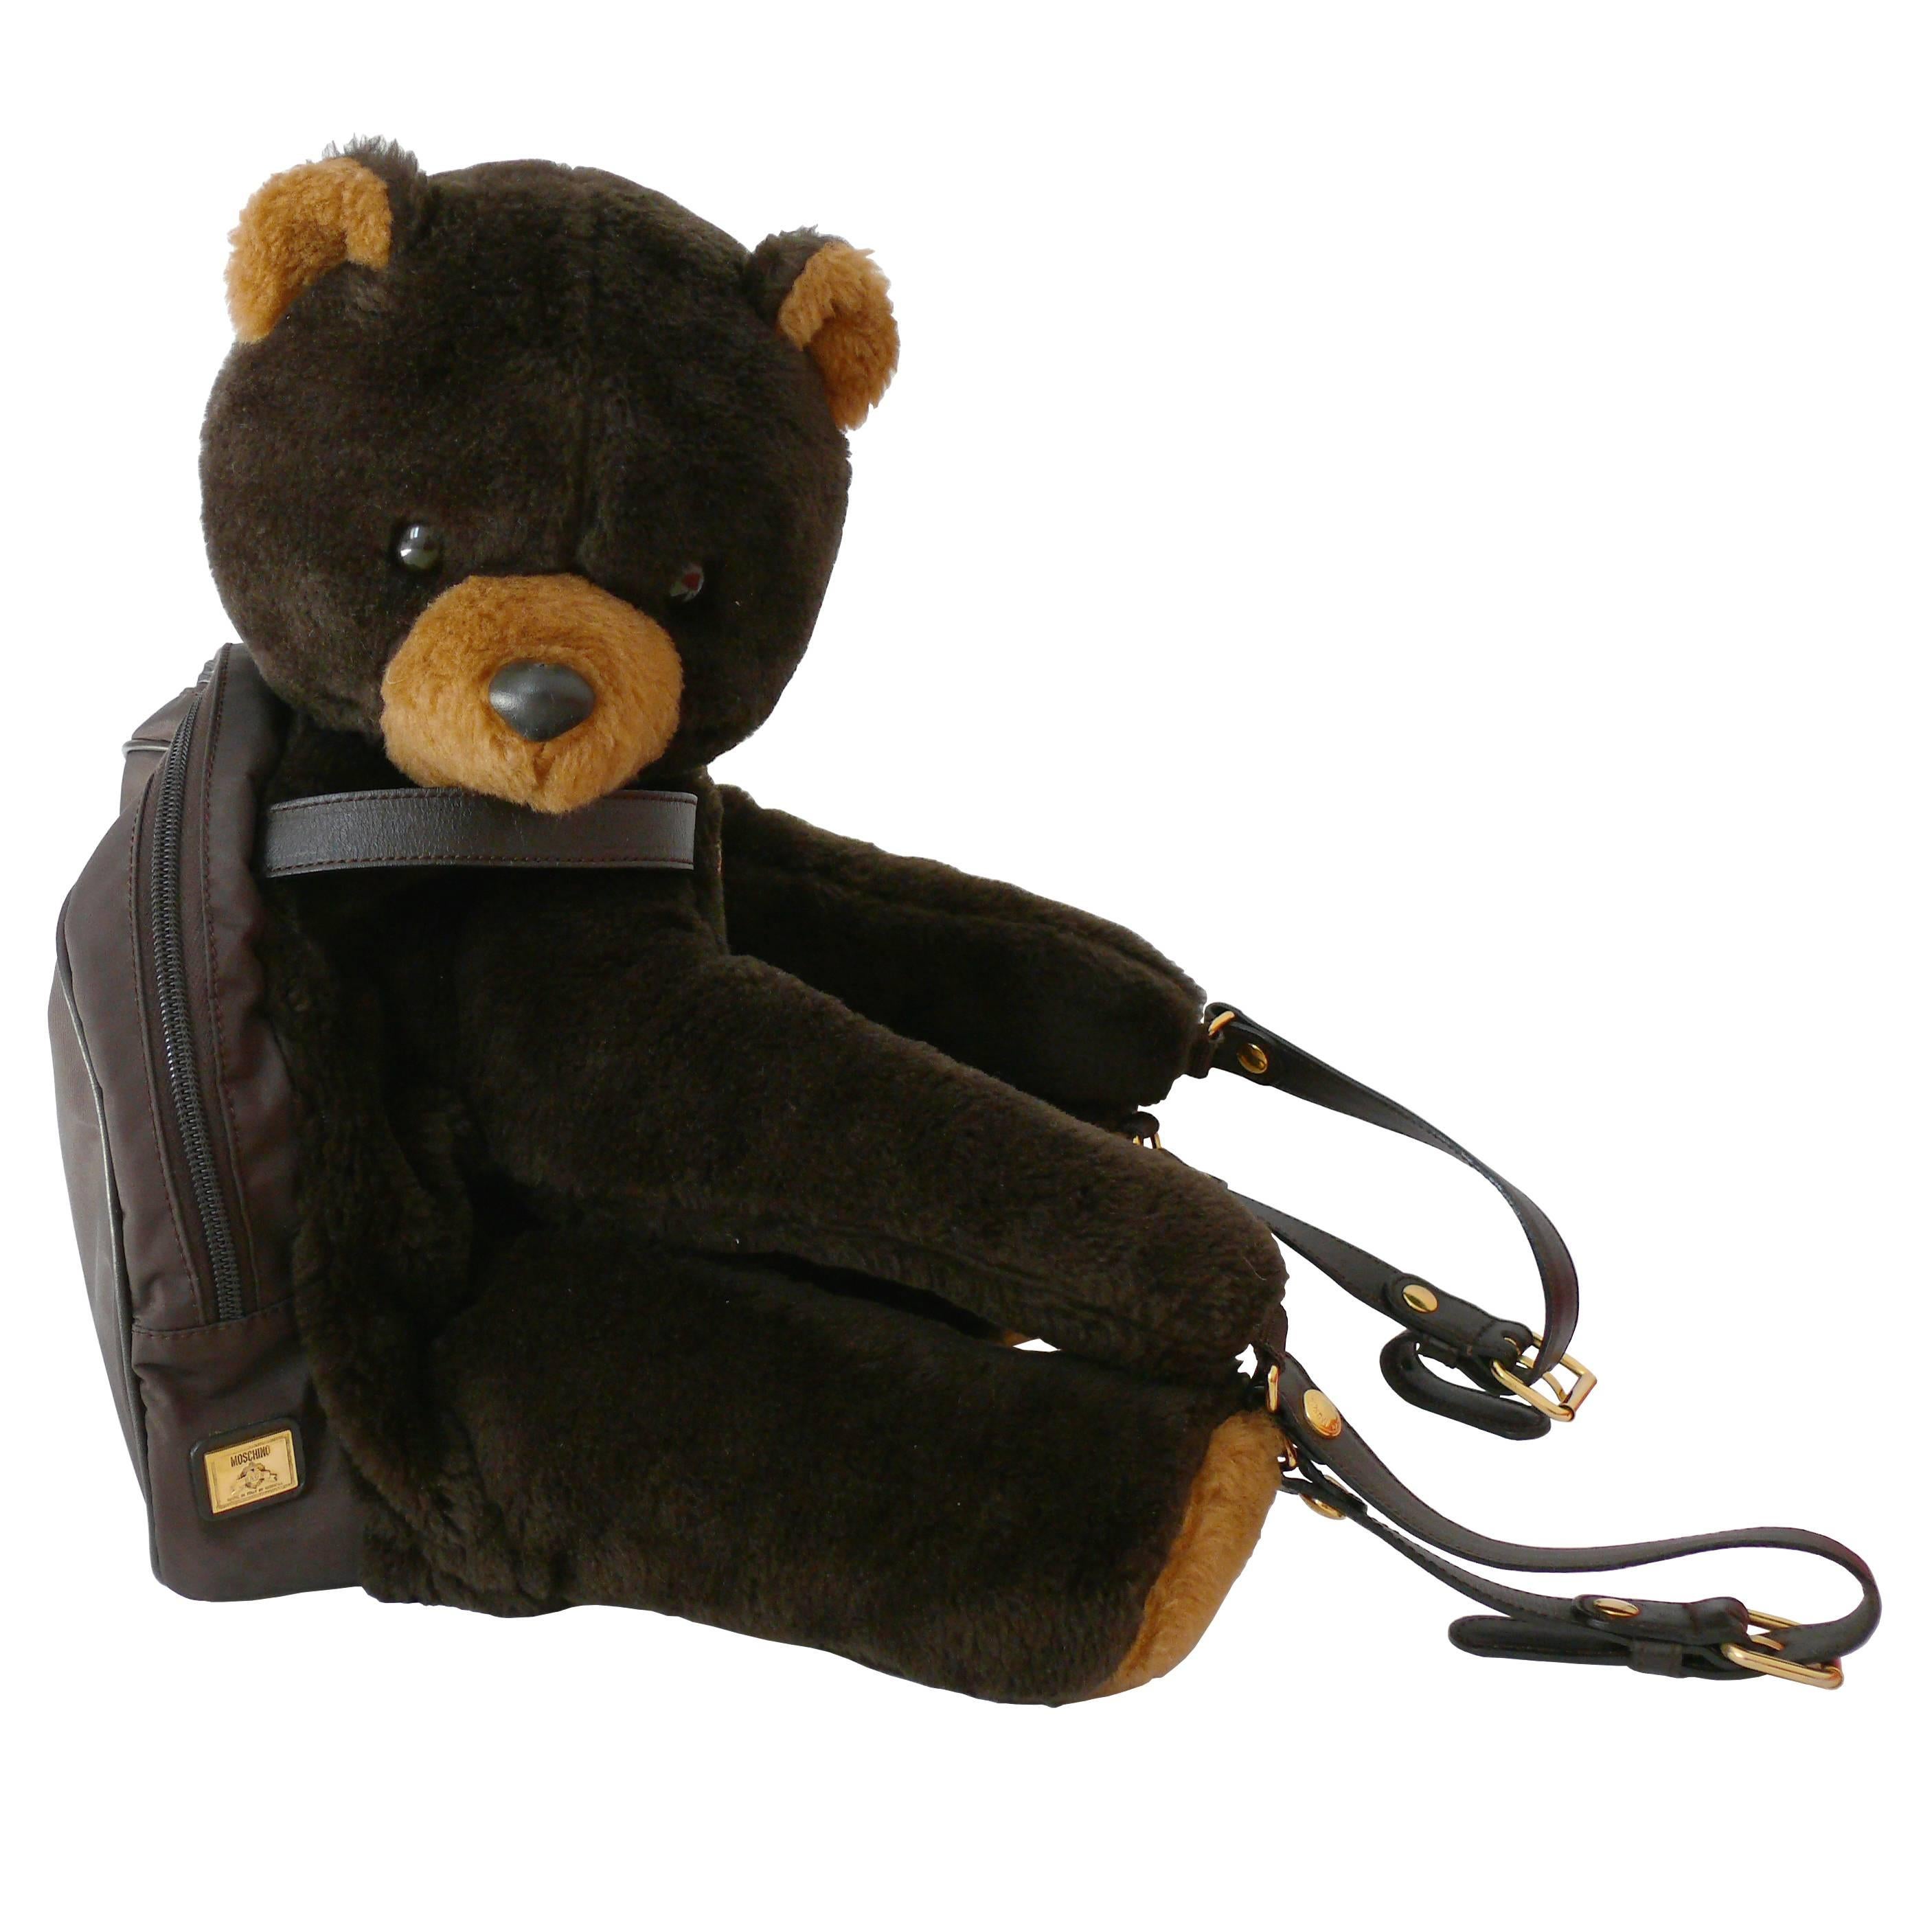 Moschino by Redwall Vintage 1990s Uber Rare Teddy Bear Backpack